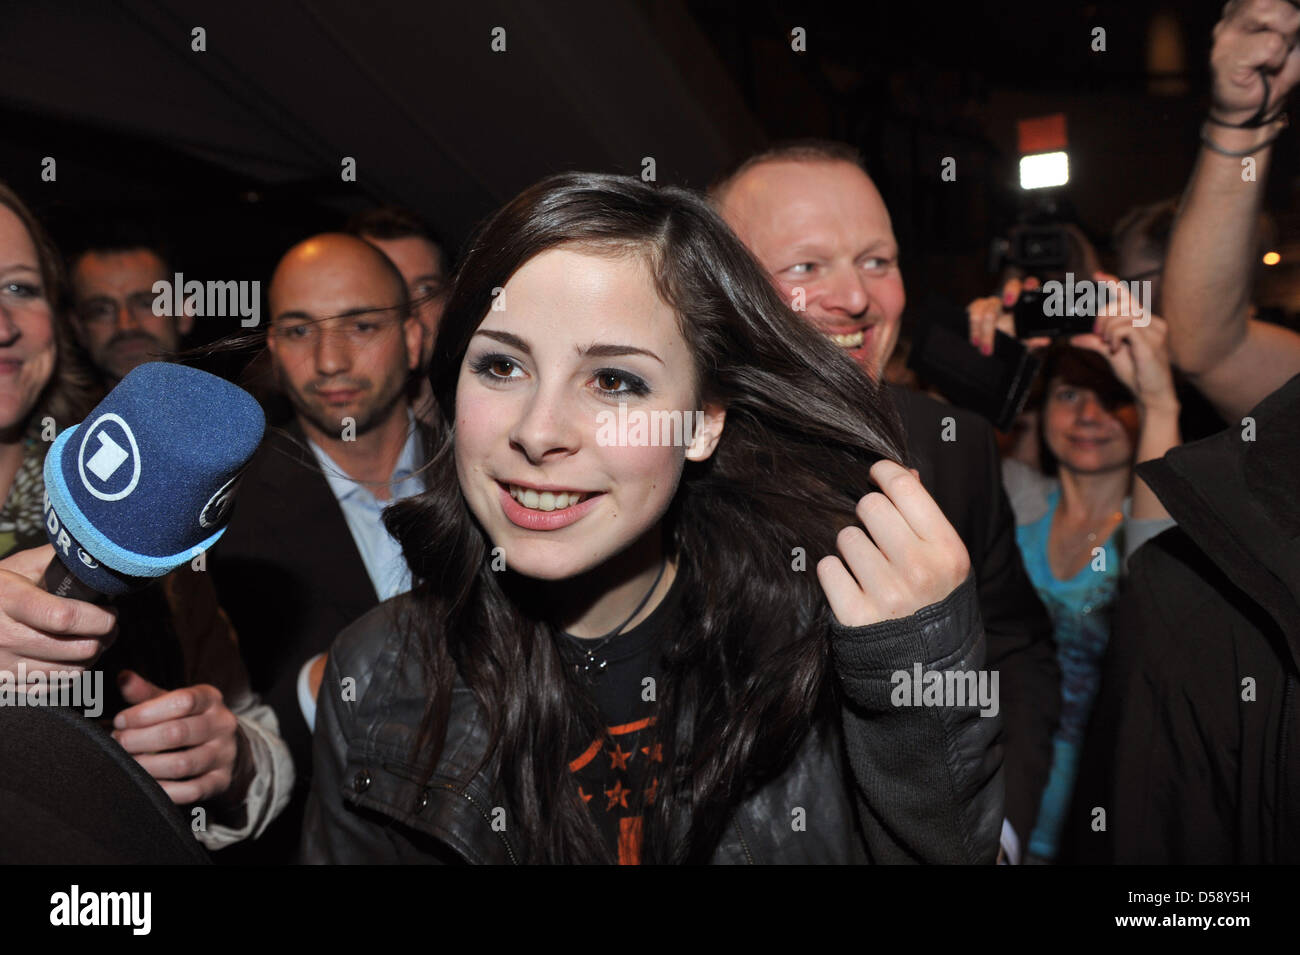 Lena Meyer Landrut 2010 High Resolution Stock Photography And Images Alamy